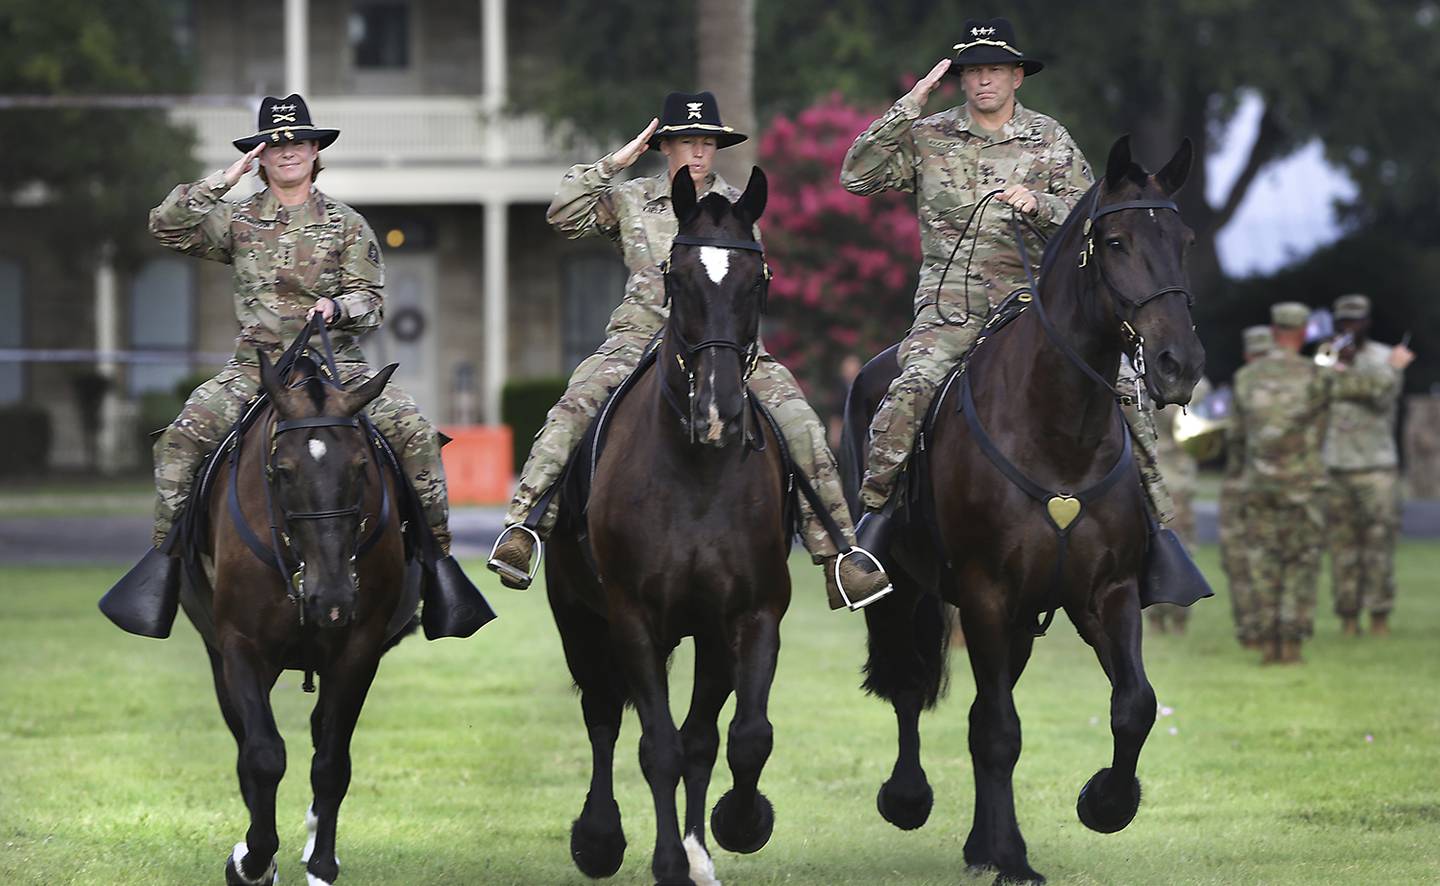 Lt. Gen. Jeffrey Buchanan, right, outgoing commander of U.S. Army North, and Lt. Gen Laura Richardson, left, incoming commander, ride with Col. Niave Knell, U.S. Army North chief of staff, to review the troops during the change of command at Fort Sam Houston on July 8, 2019.